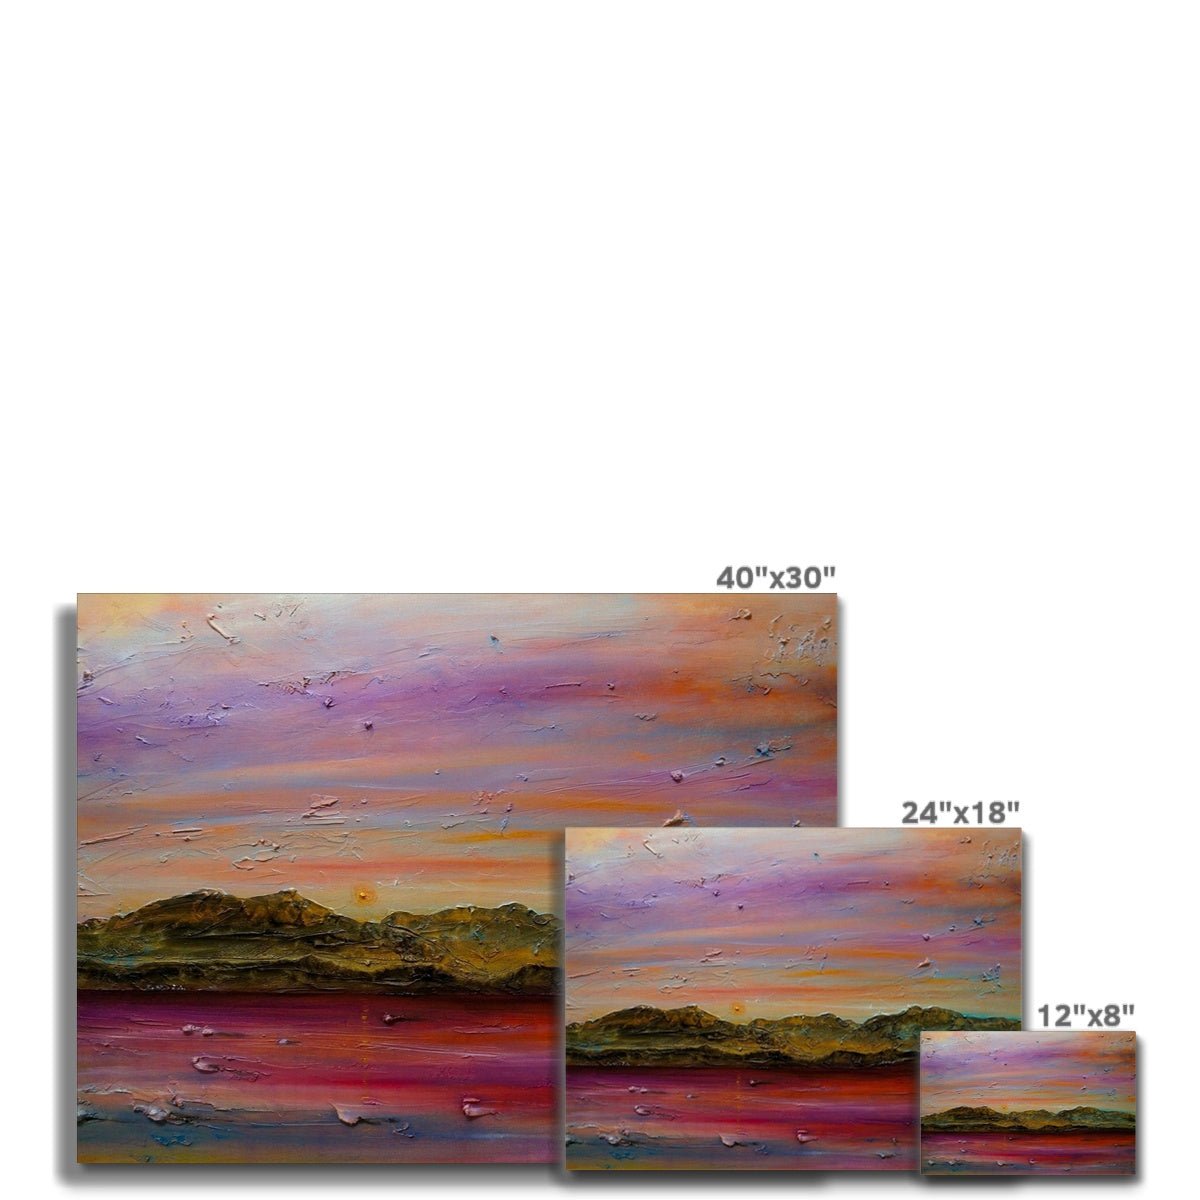 Arran Autumn Dusk Painting | Canvas From Scotland-Contemporary Stretched Canvas Prints-Arran Art Gallery-Paintings, Prints, Homeware, Art Gifts From Scotland By Scottish Artist Kevin Hunter